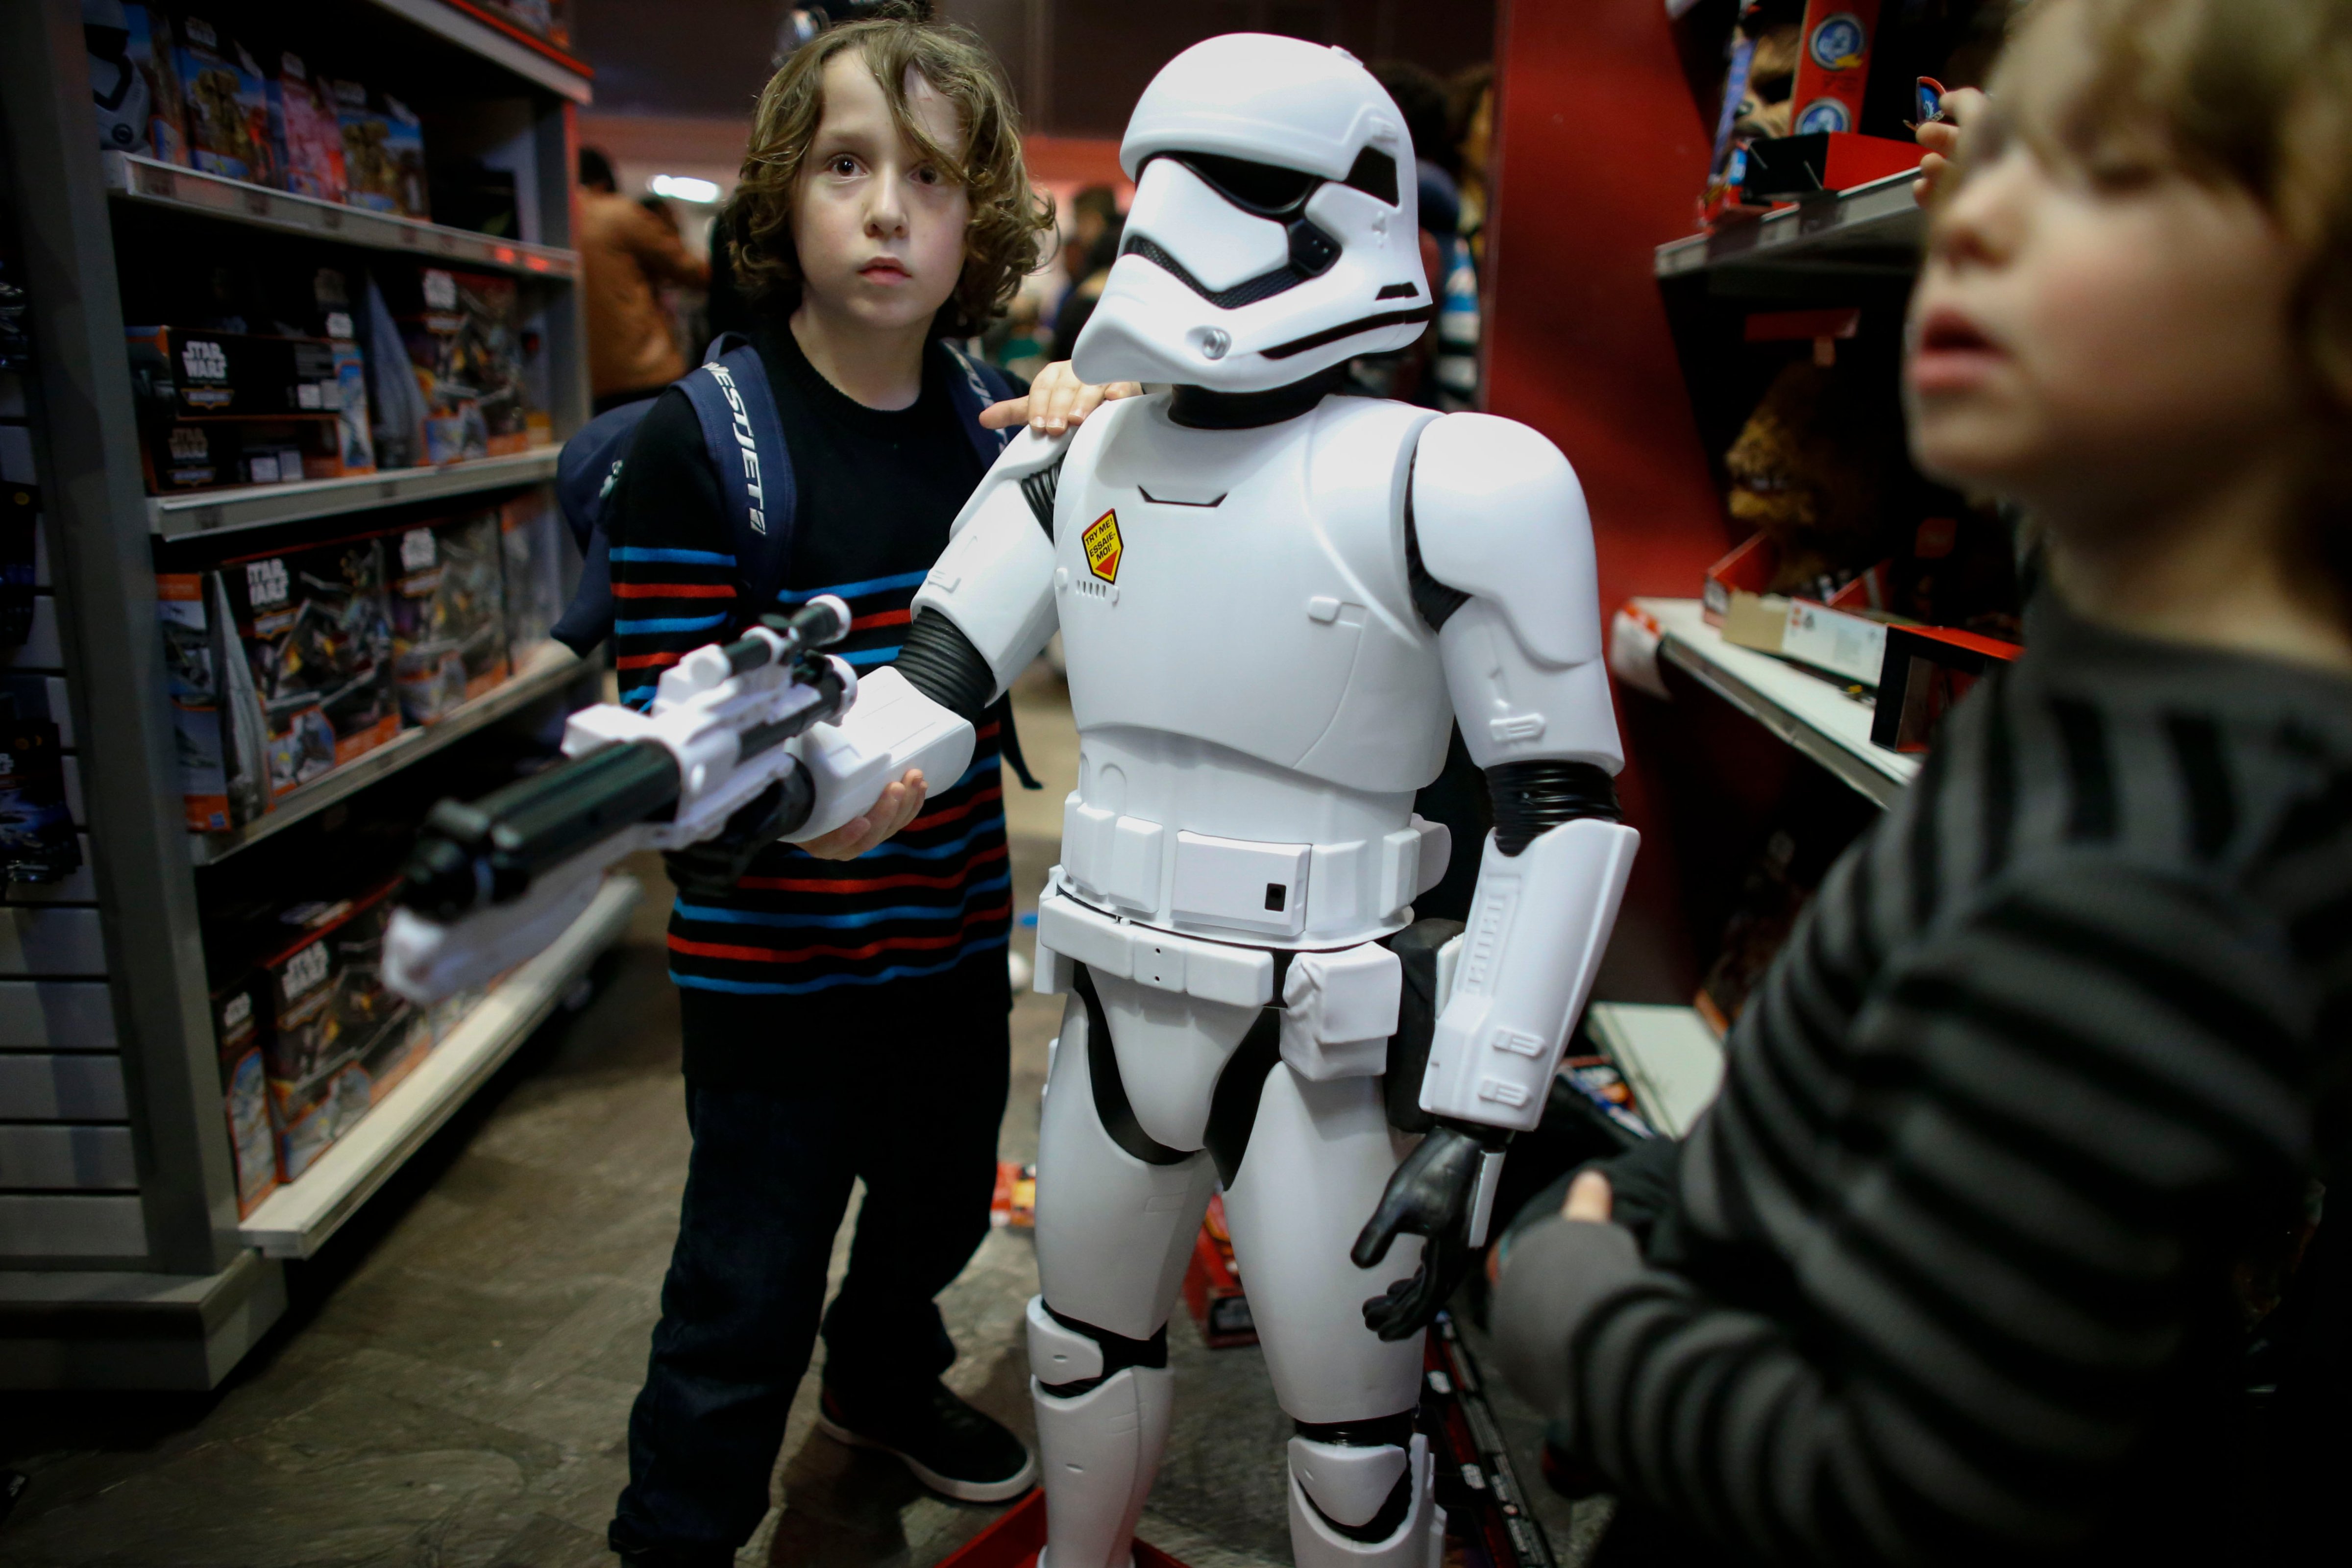 Boys play with a Stormtrooper toy from Star Wars at a Toys"R"Us store on December 24, 2015 in New York City. (Kena Betancur—Getty Images)